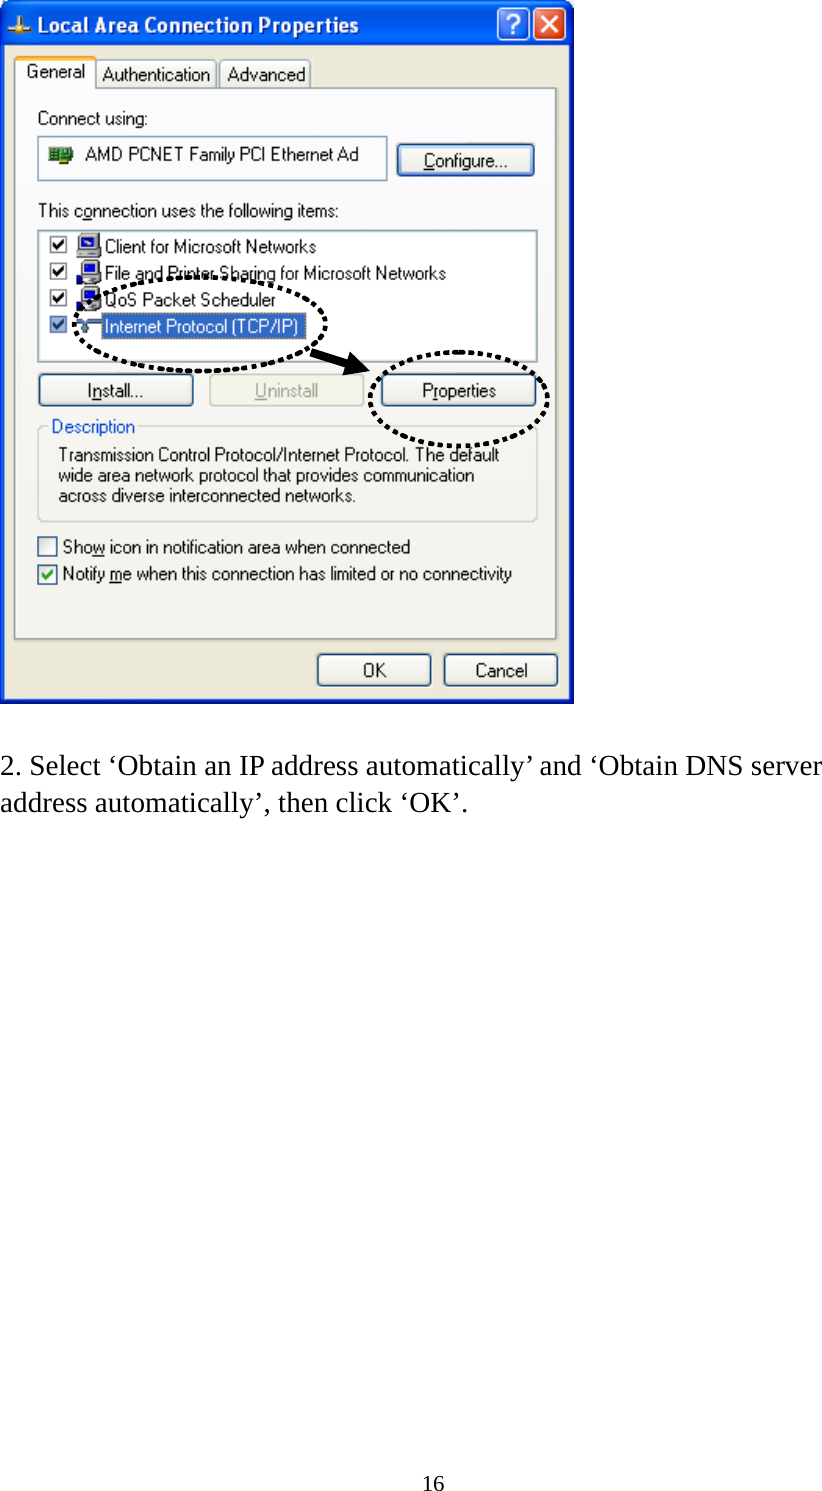 16   2. Select ‘Obtain an IP address automatically’ and ‘Obtain DNS server address automatically’, then click ‘OK’. 